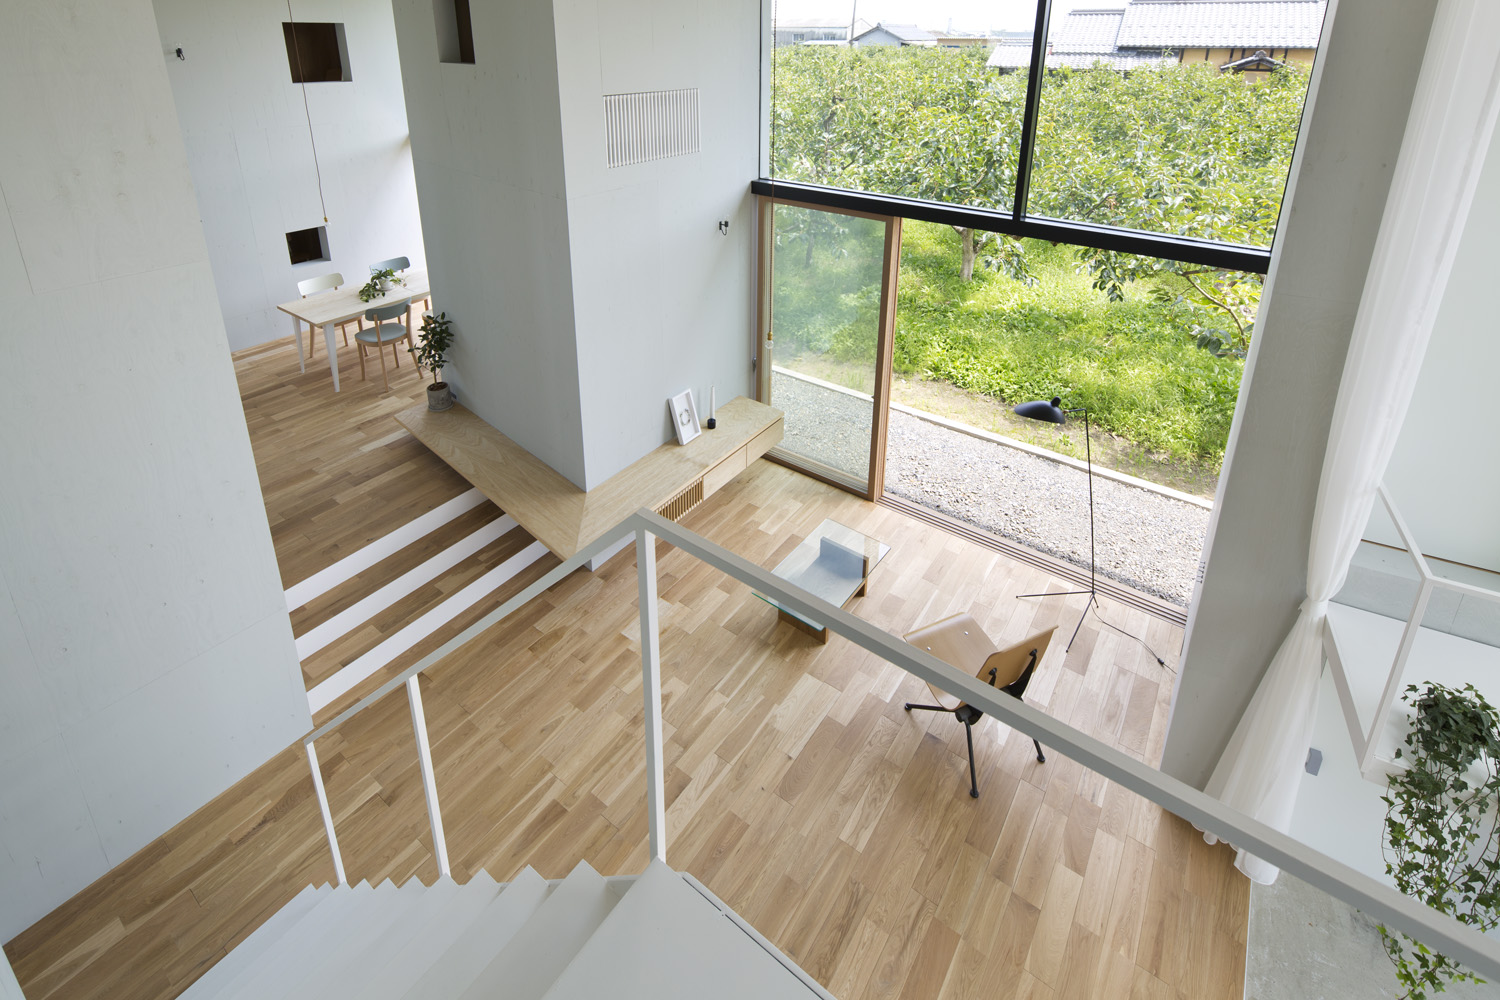 House in Ohno in Gifu, Japan by Airhouse